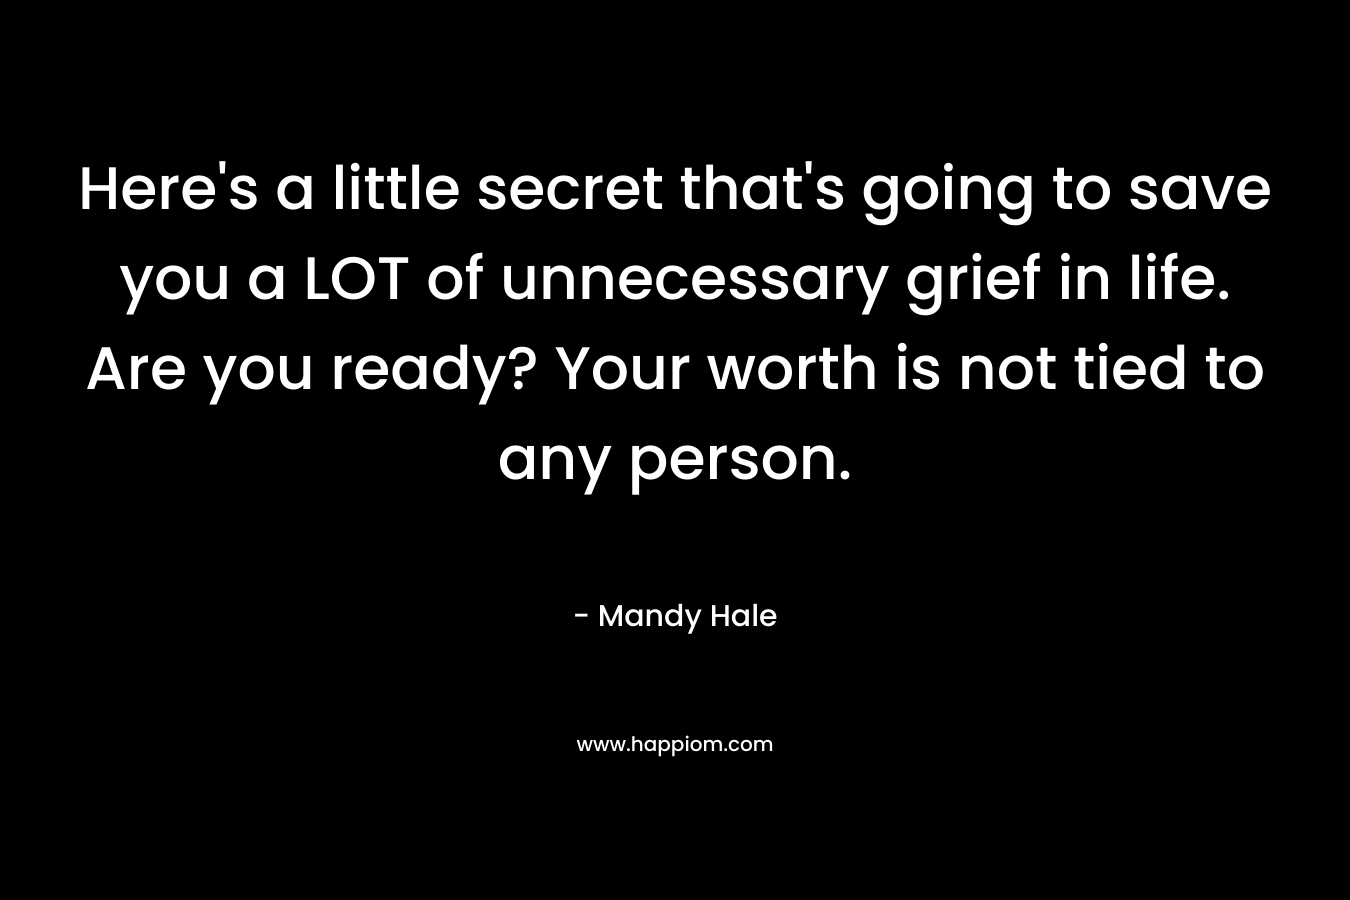 Here's a little secret that's going to save you a LOT of unnecessary grief in life. Are you ready? Your worth is not tied to any person.